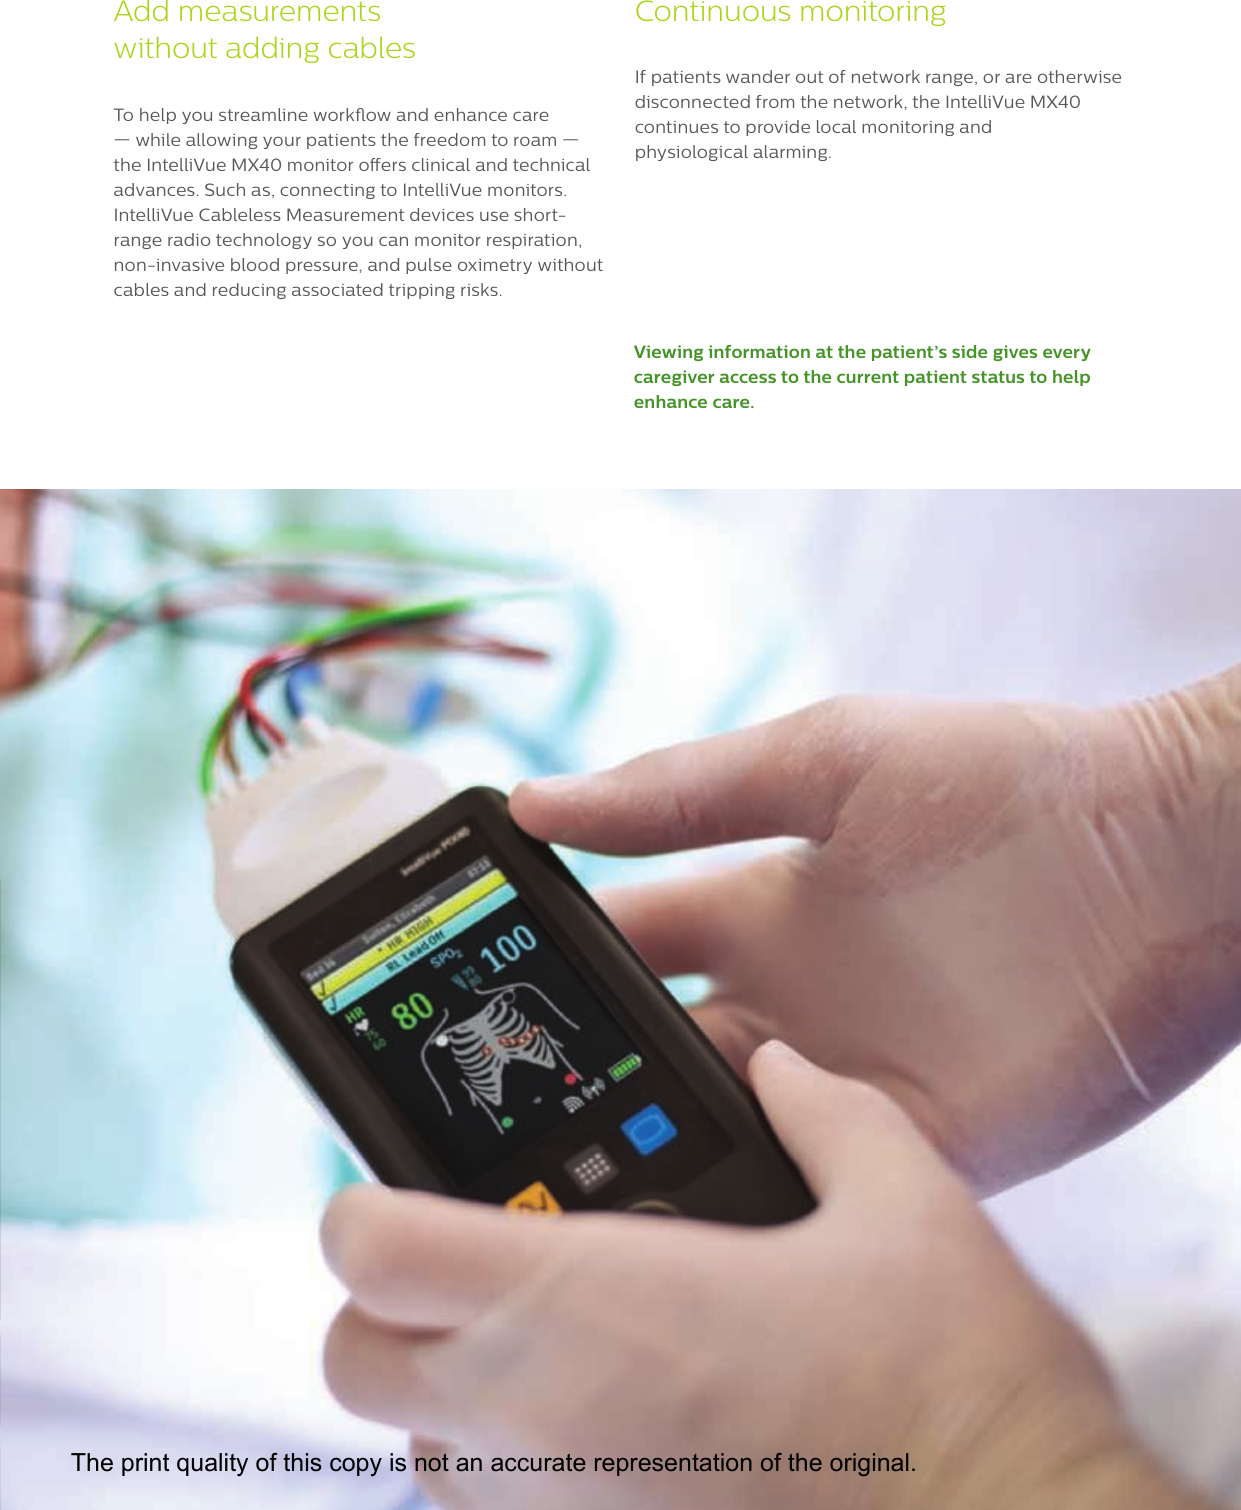 Page 3 of 8 - Philips 865350 452299118501 User Manual Product Brochure Intelli Vue Wearable Patient Monitor MX40 B349908a9e374f02a157a77c016a06b7